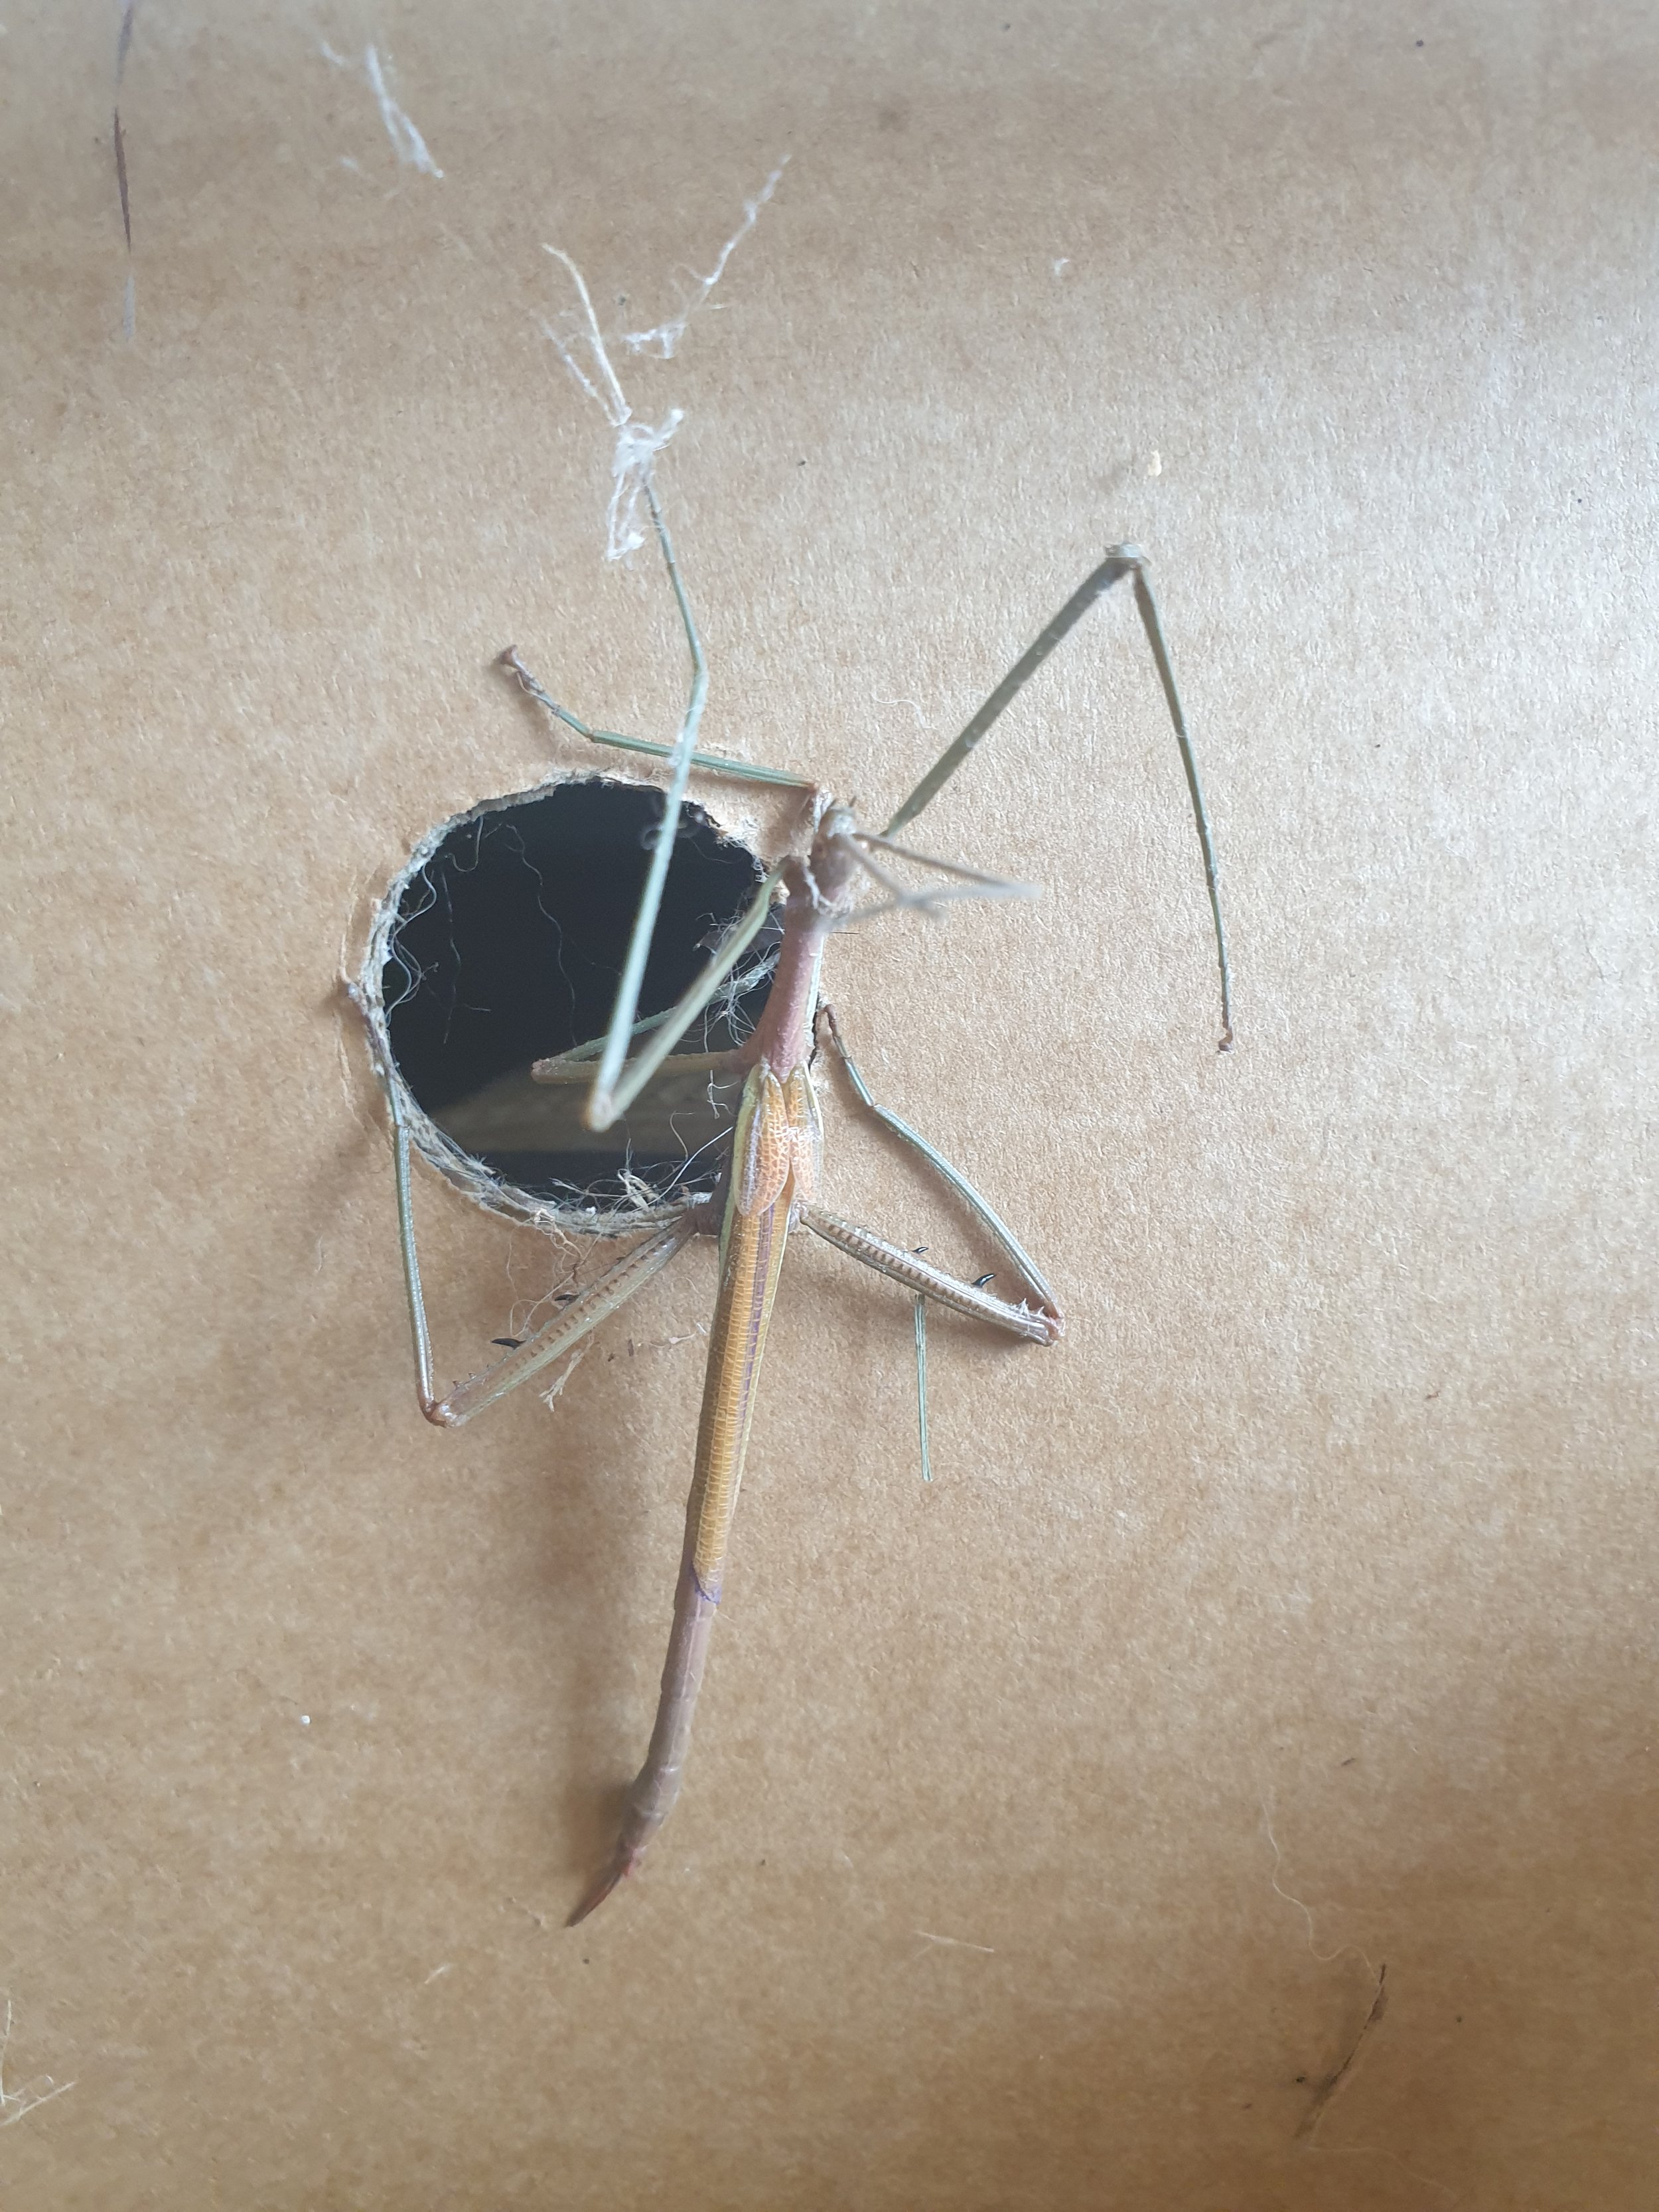 Stick insect next to hole in cardboard box